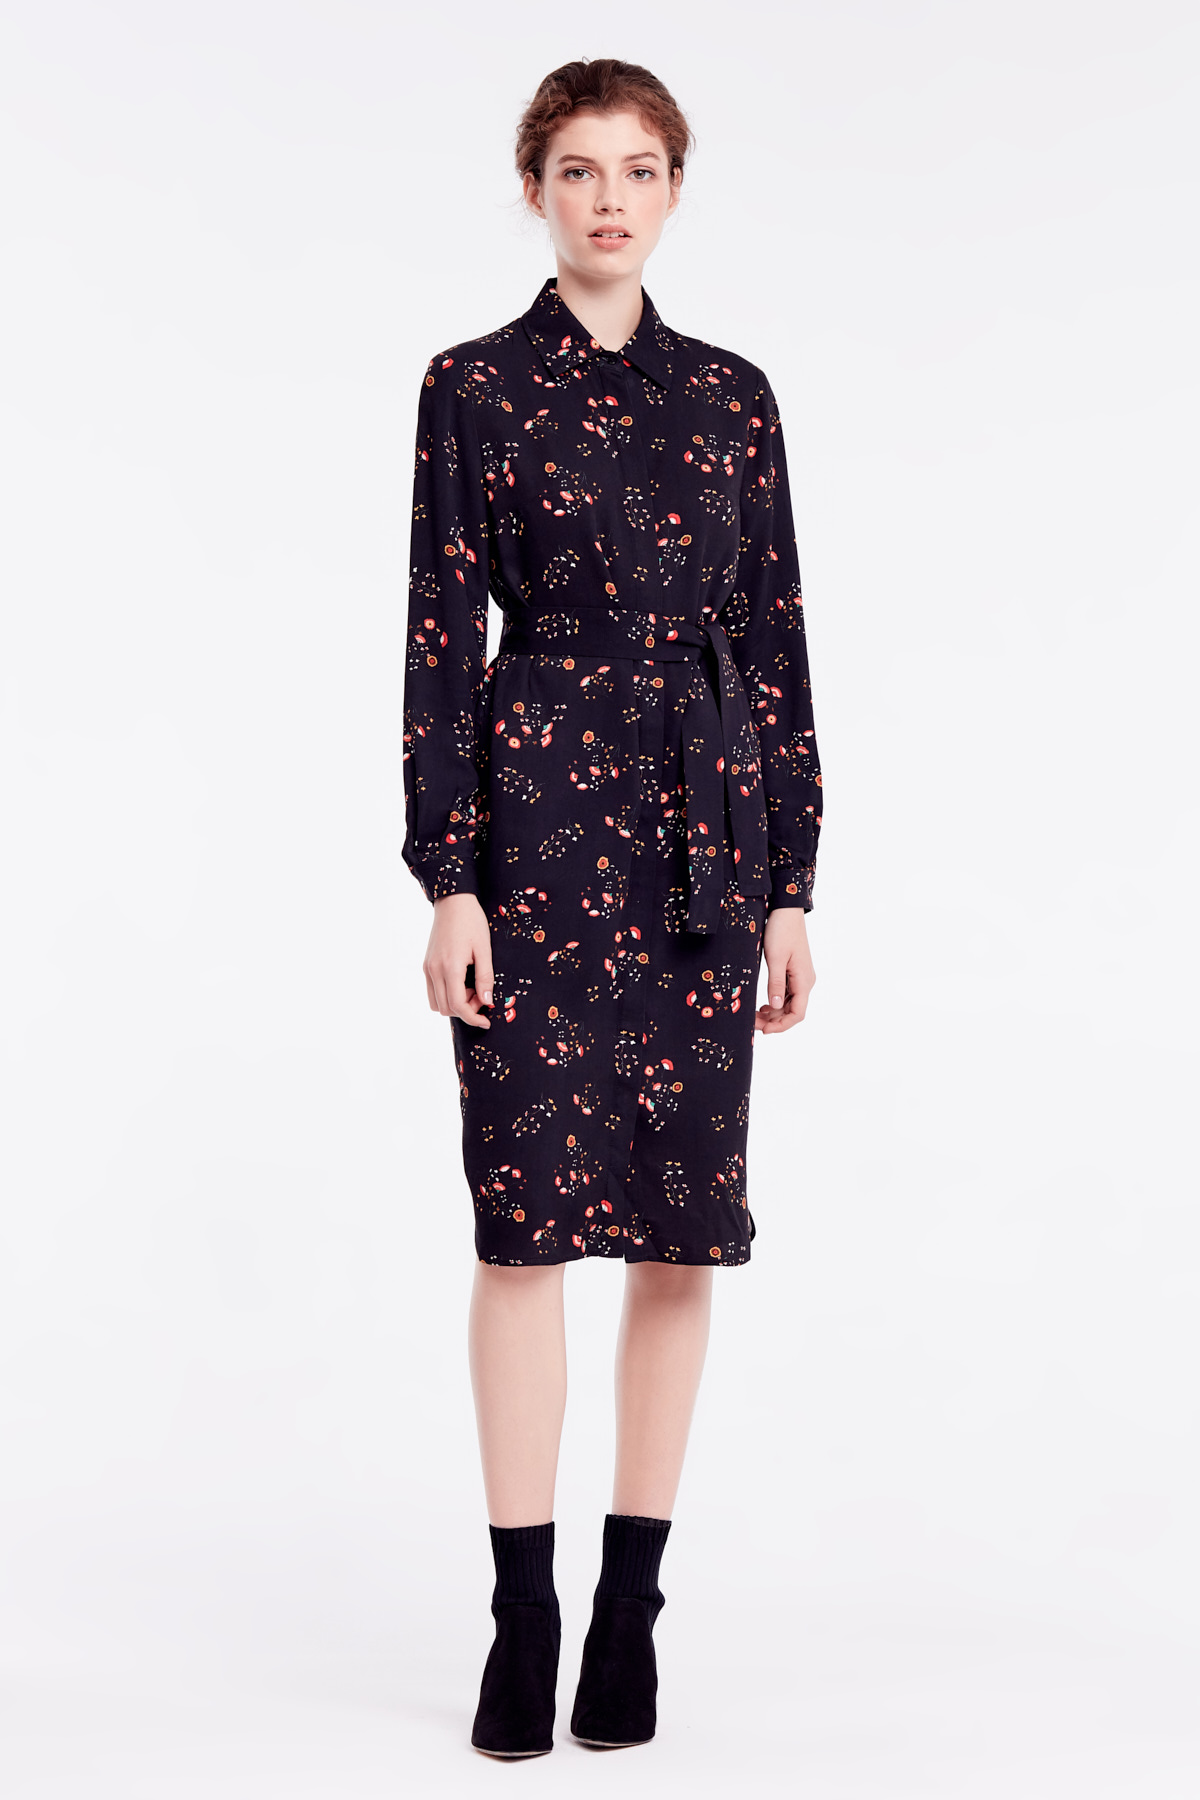 Black floral dress with a concealed placket, photo 3